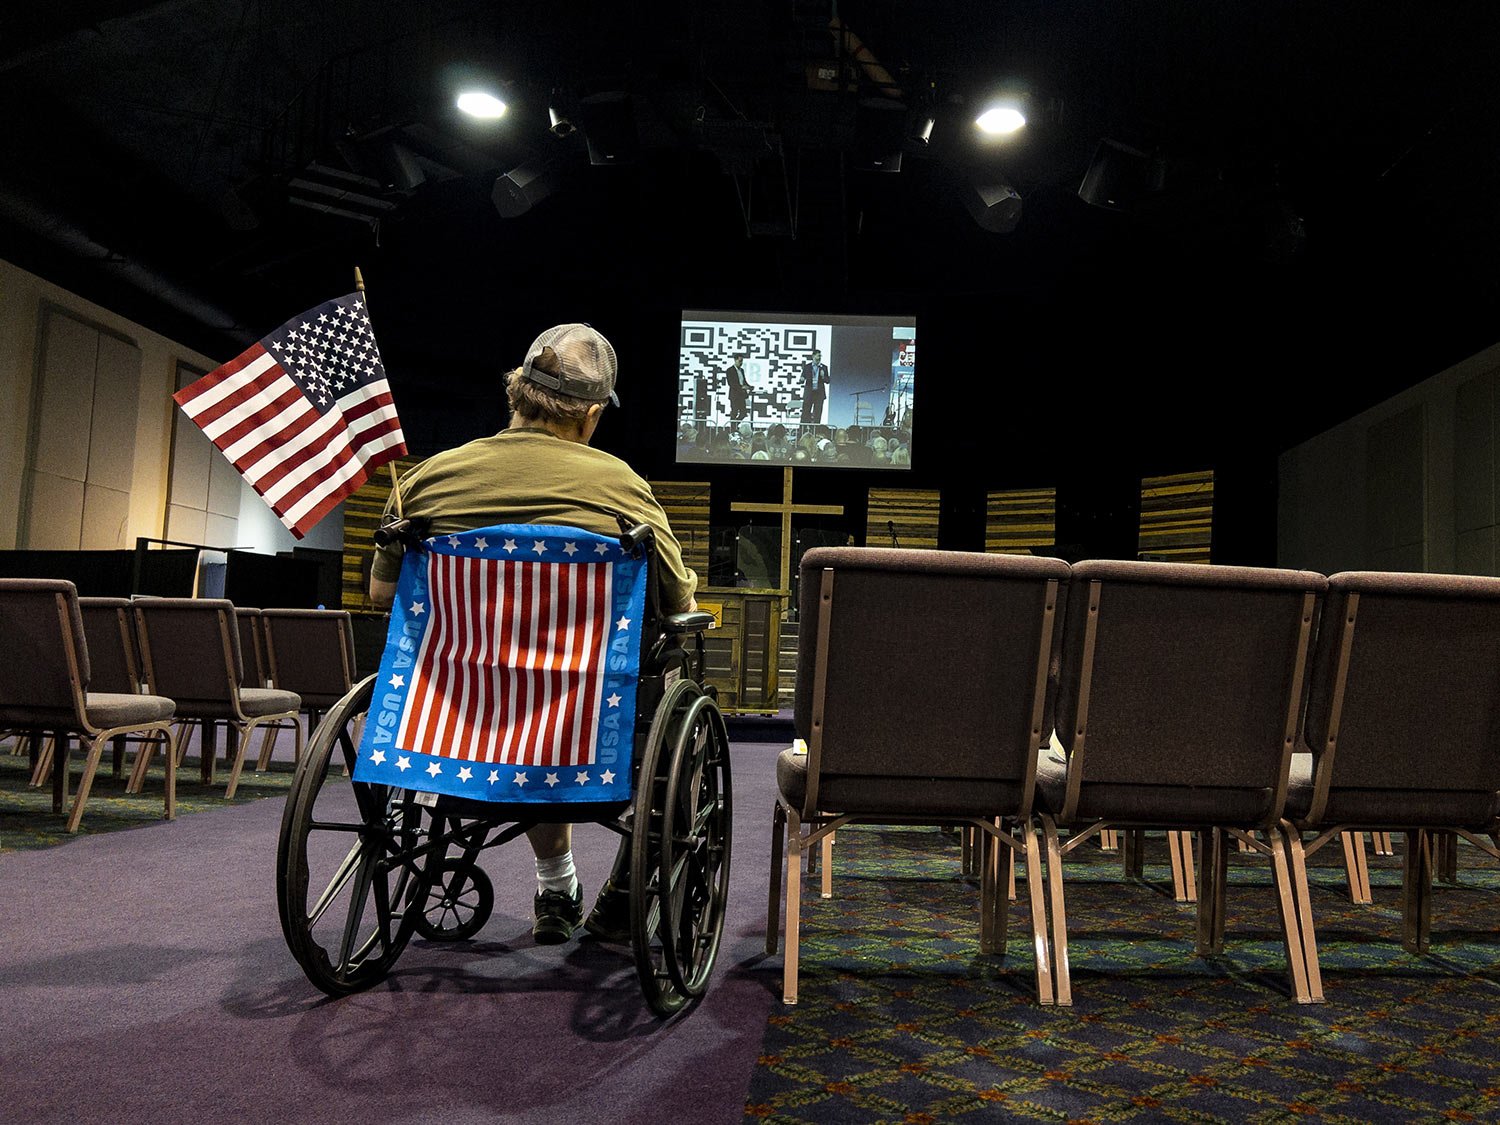  A man watches a live video feed during the ReAwaken America Tour from inside the Cornerstone Church in Batavia, N.Y., Aug. 12, 2022. (AP Photo/Carolyn Kaster) 